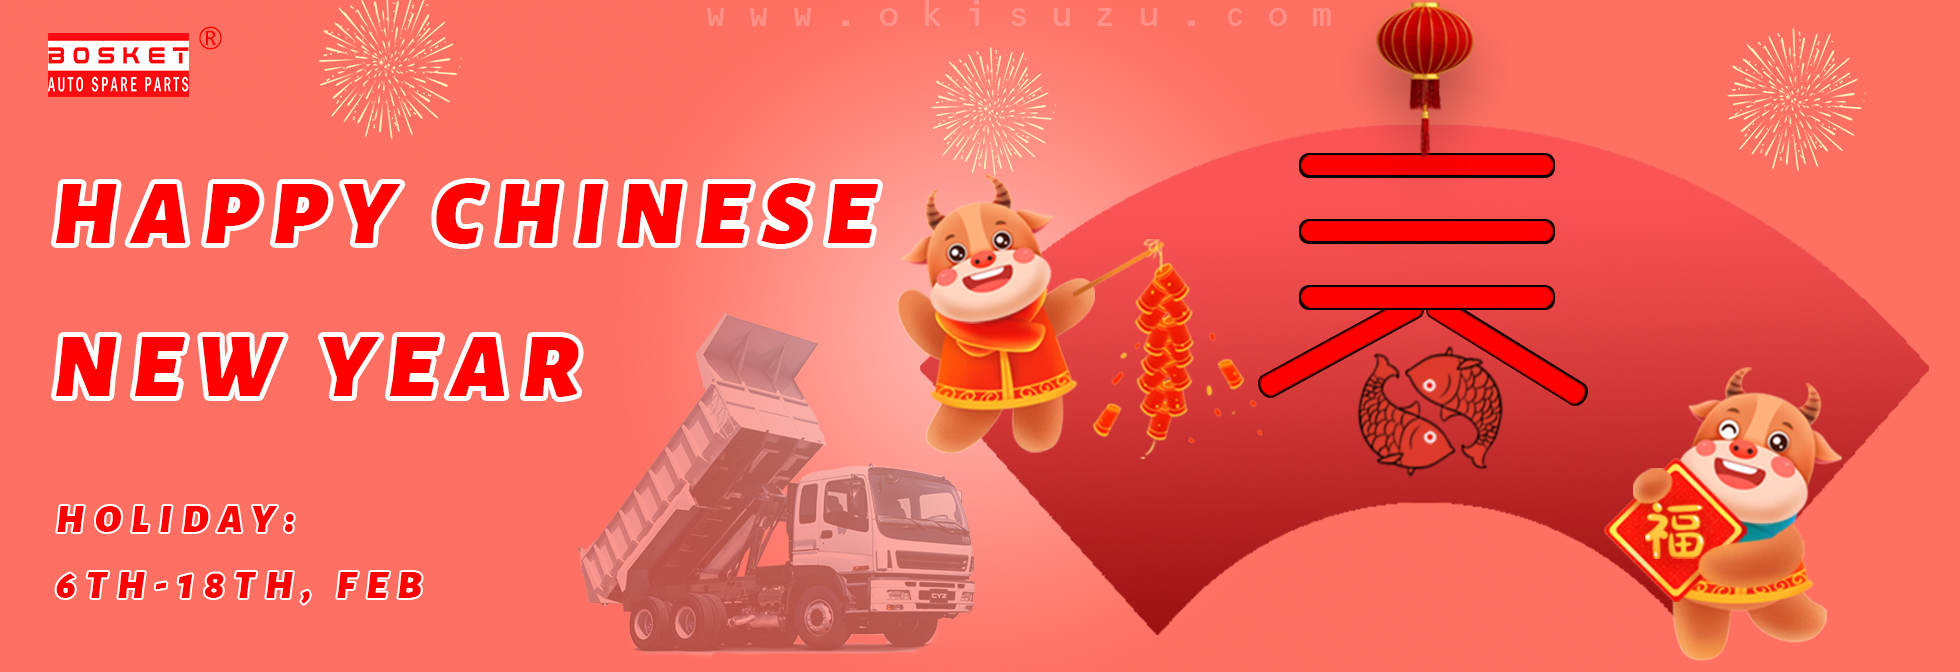 HOLIDAY NOTICE: HAPPY CHINESE NEW YEAR